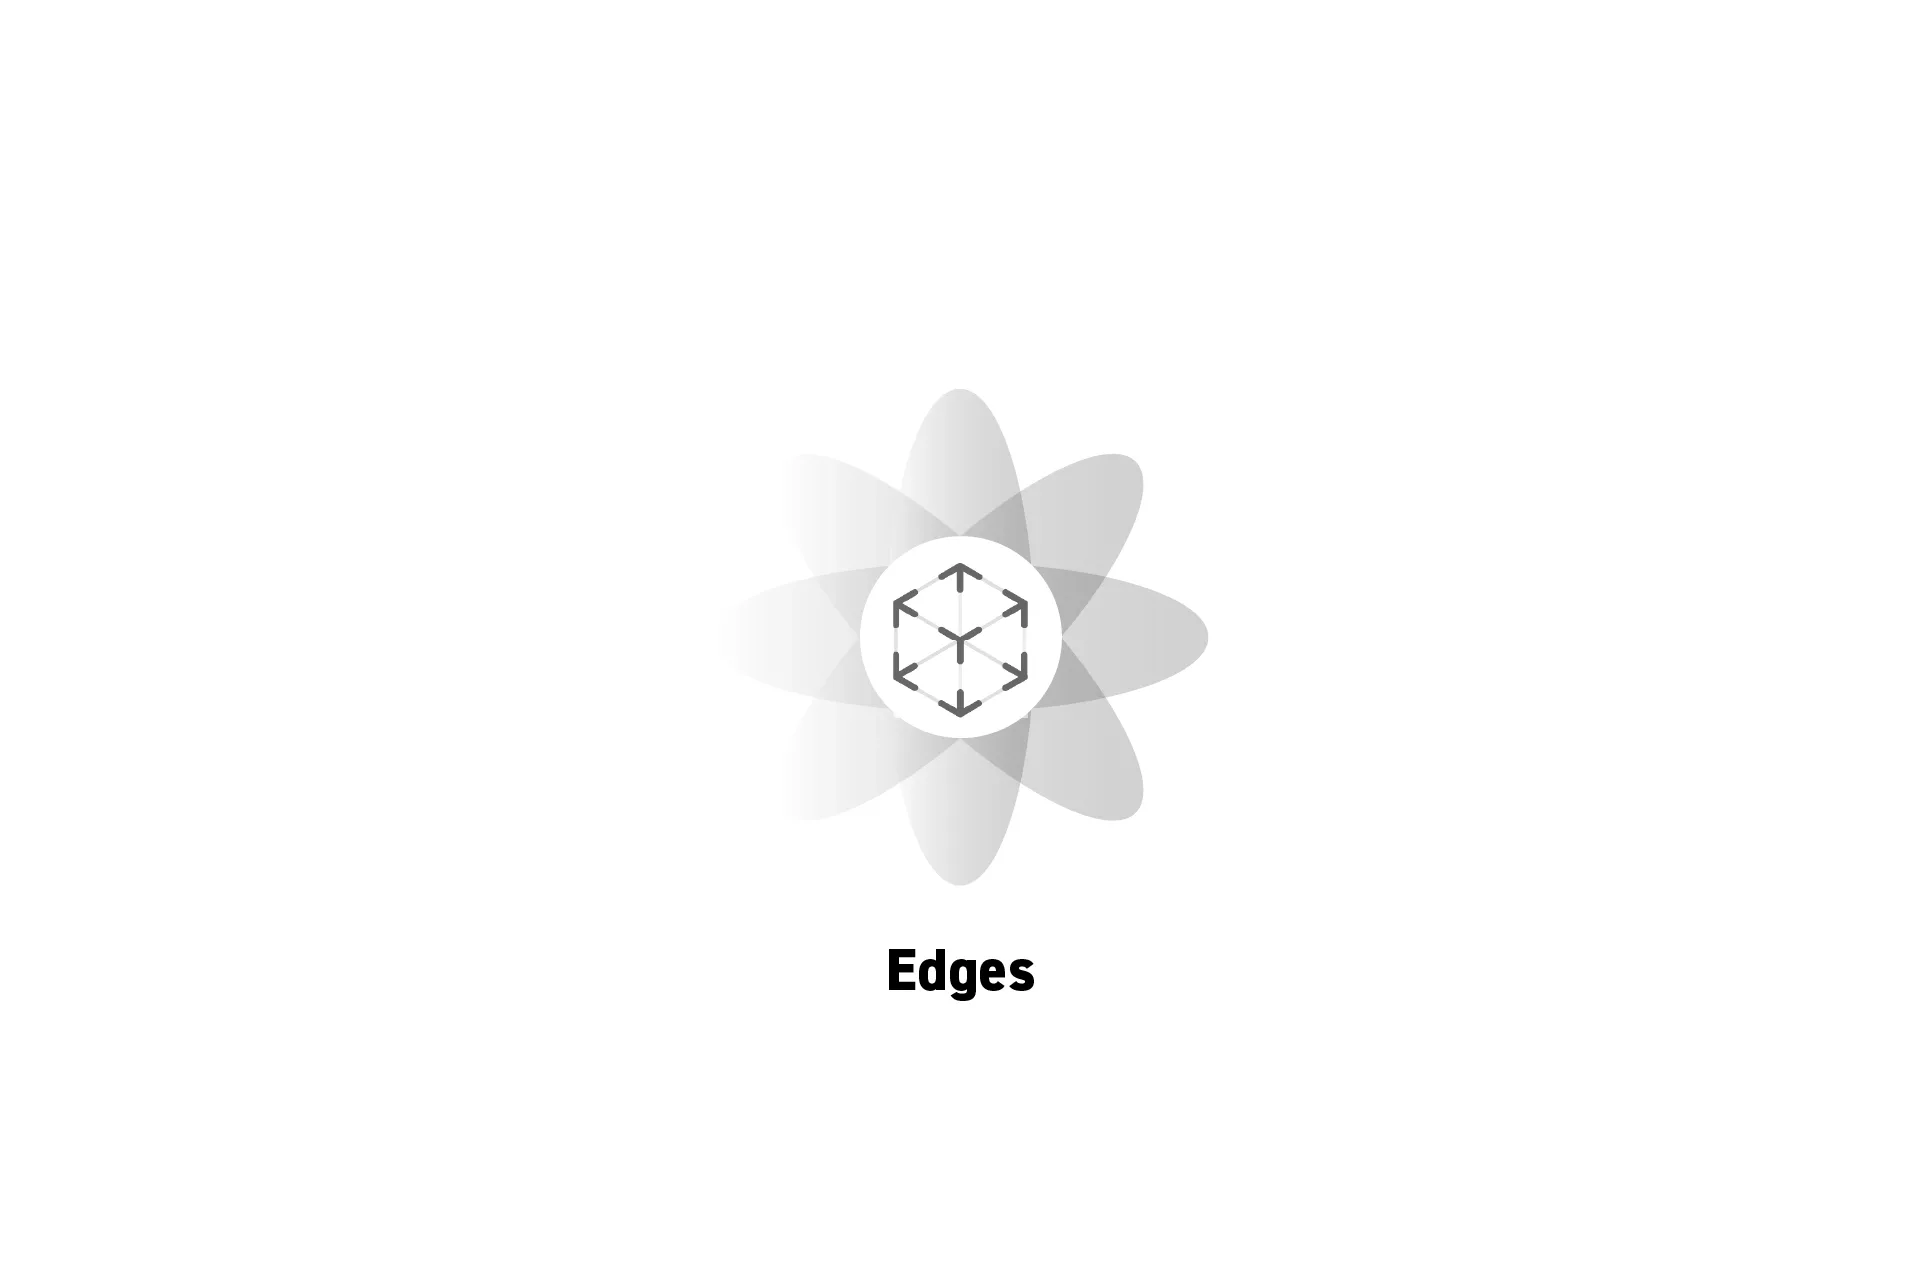 A flower that represents spatial computing with the text "Edges" beneath it.